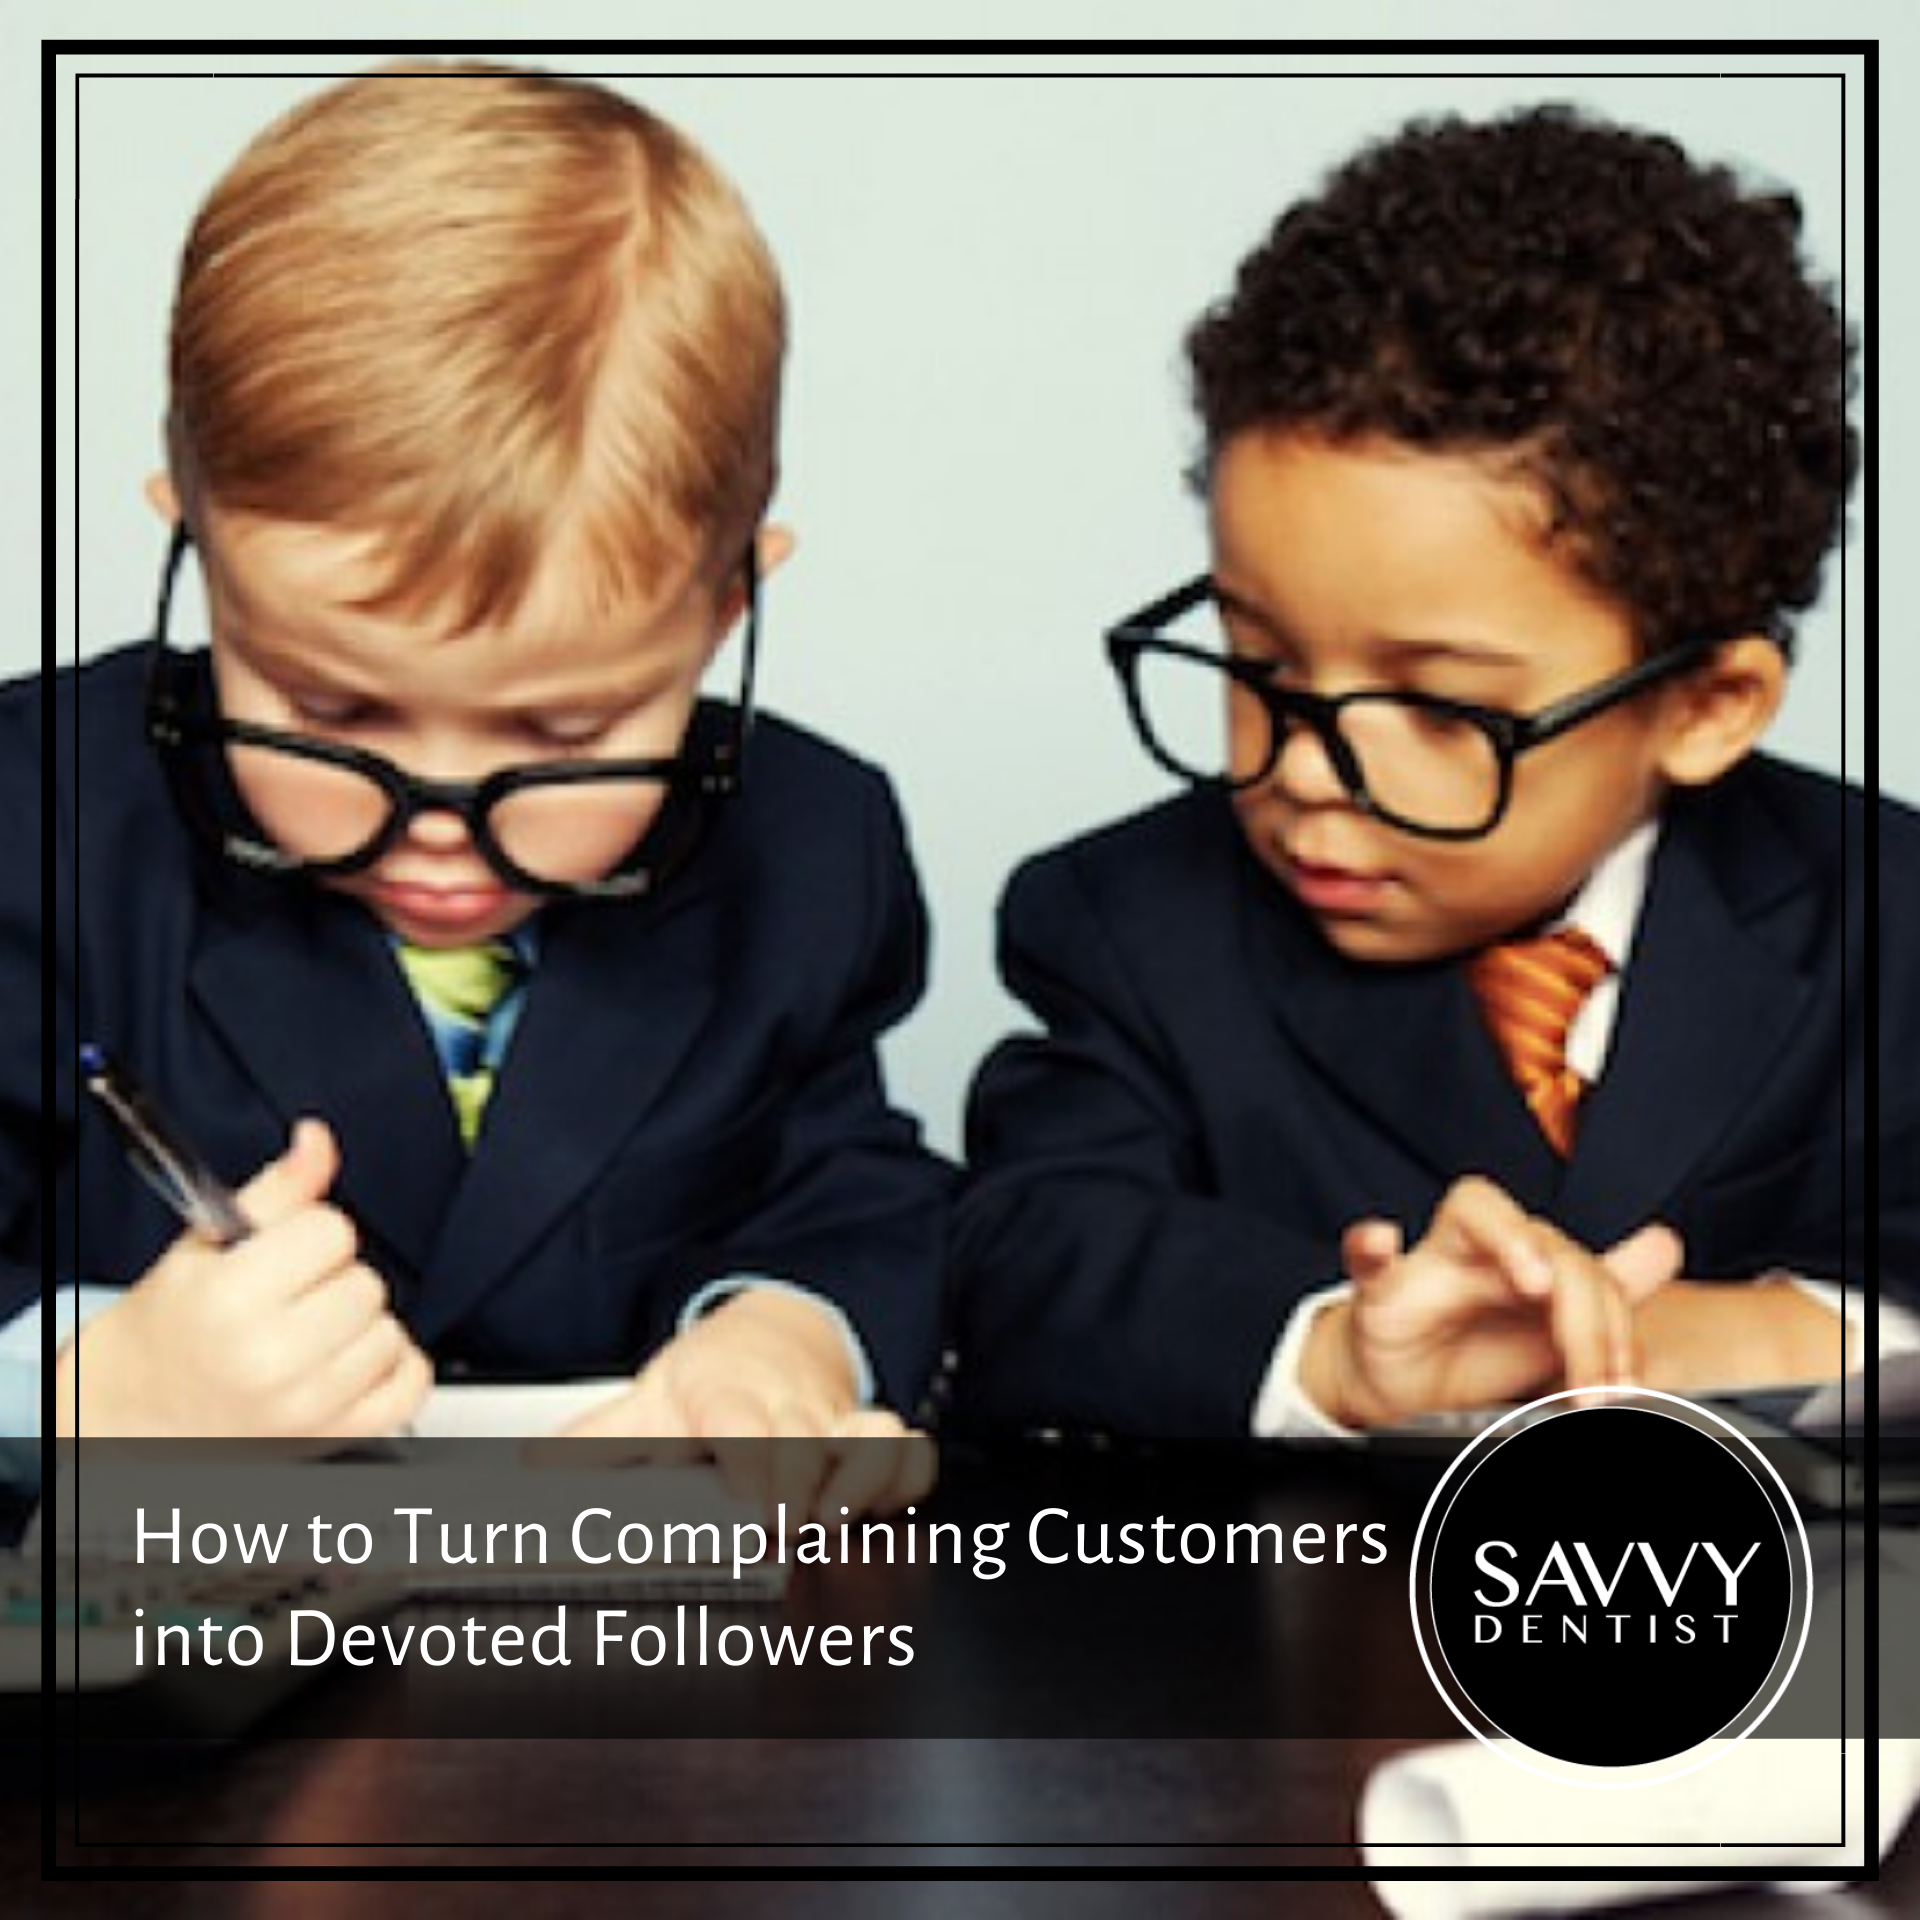 How to Turn Complaining Customers into Devoted Followers